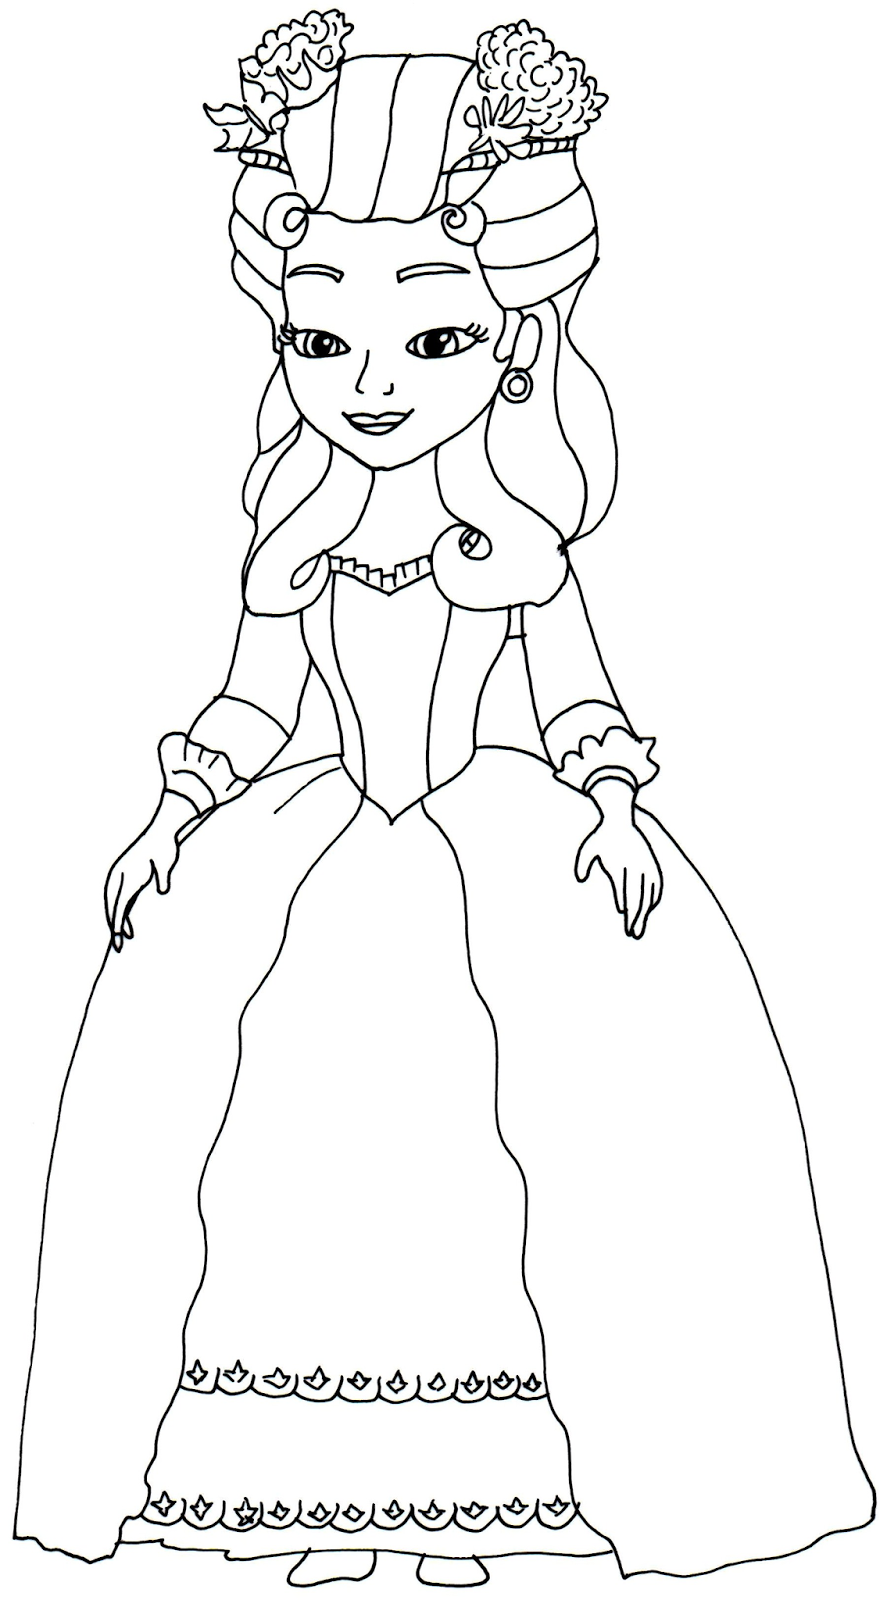 Sofia The First Coloring Pages: Princess Hildegard - Sofia the First